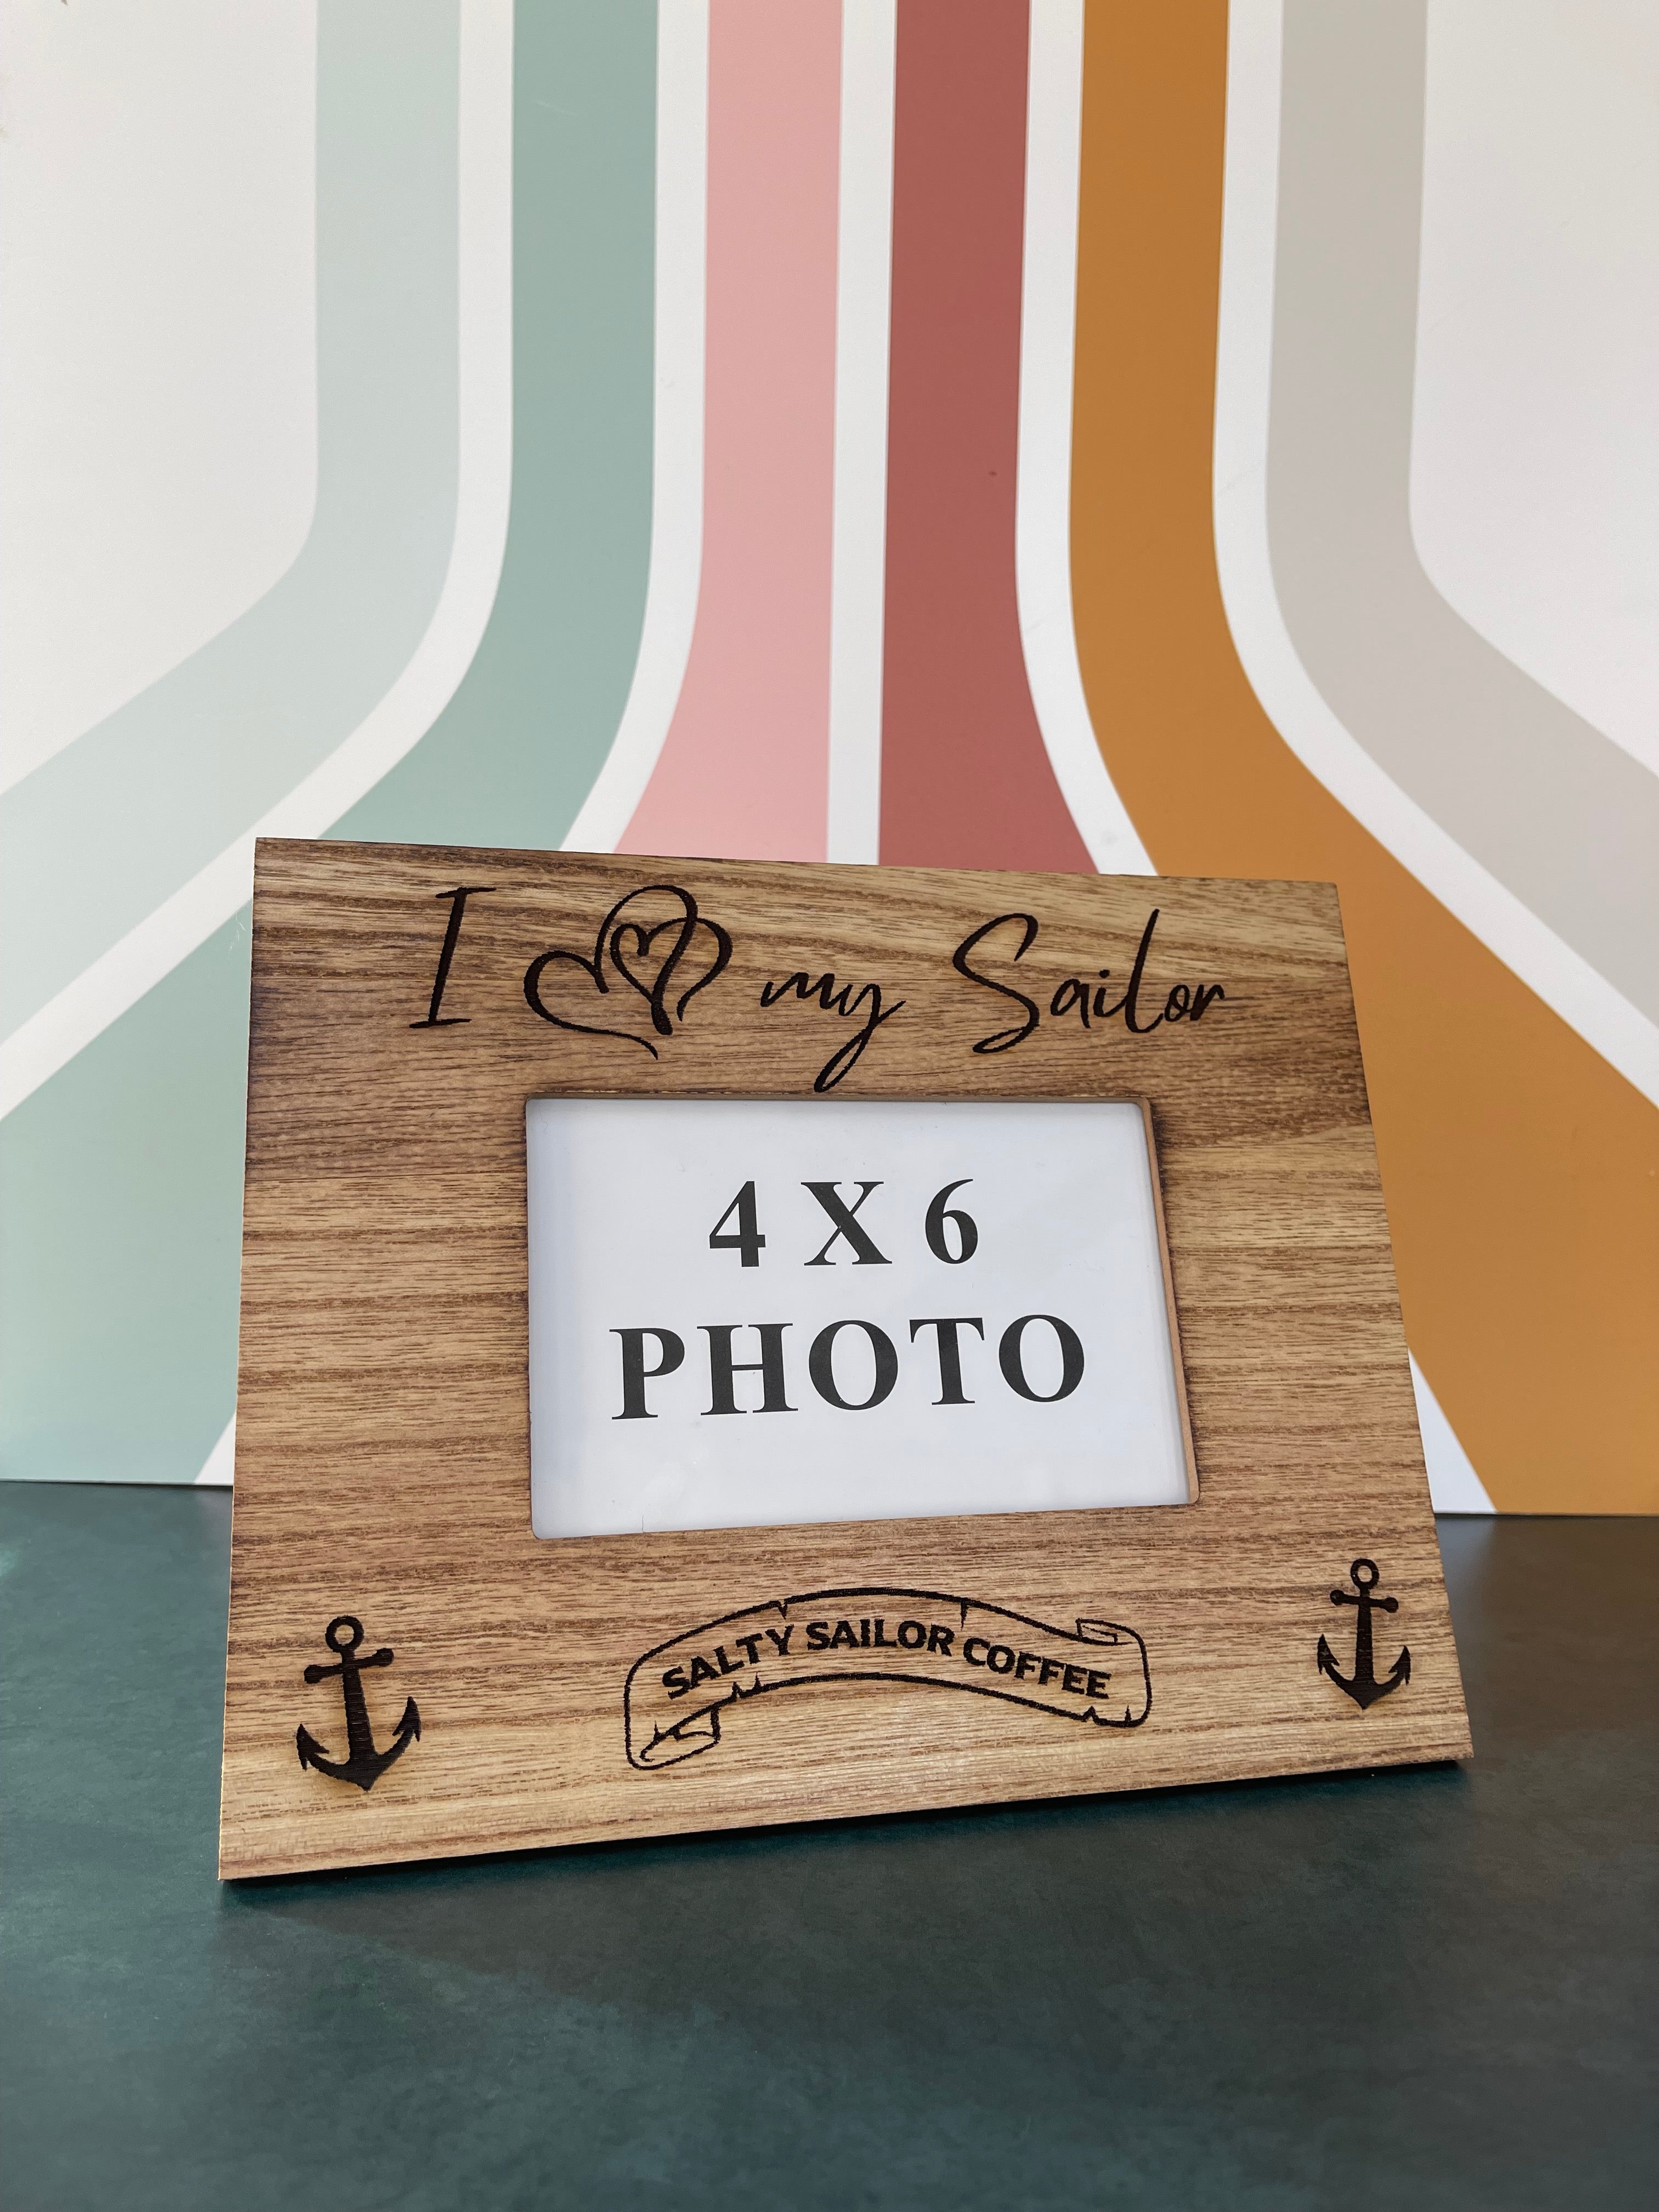 Salty Sailor Picture Frame